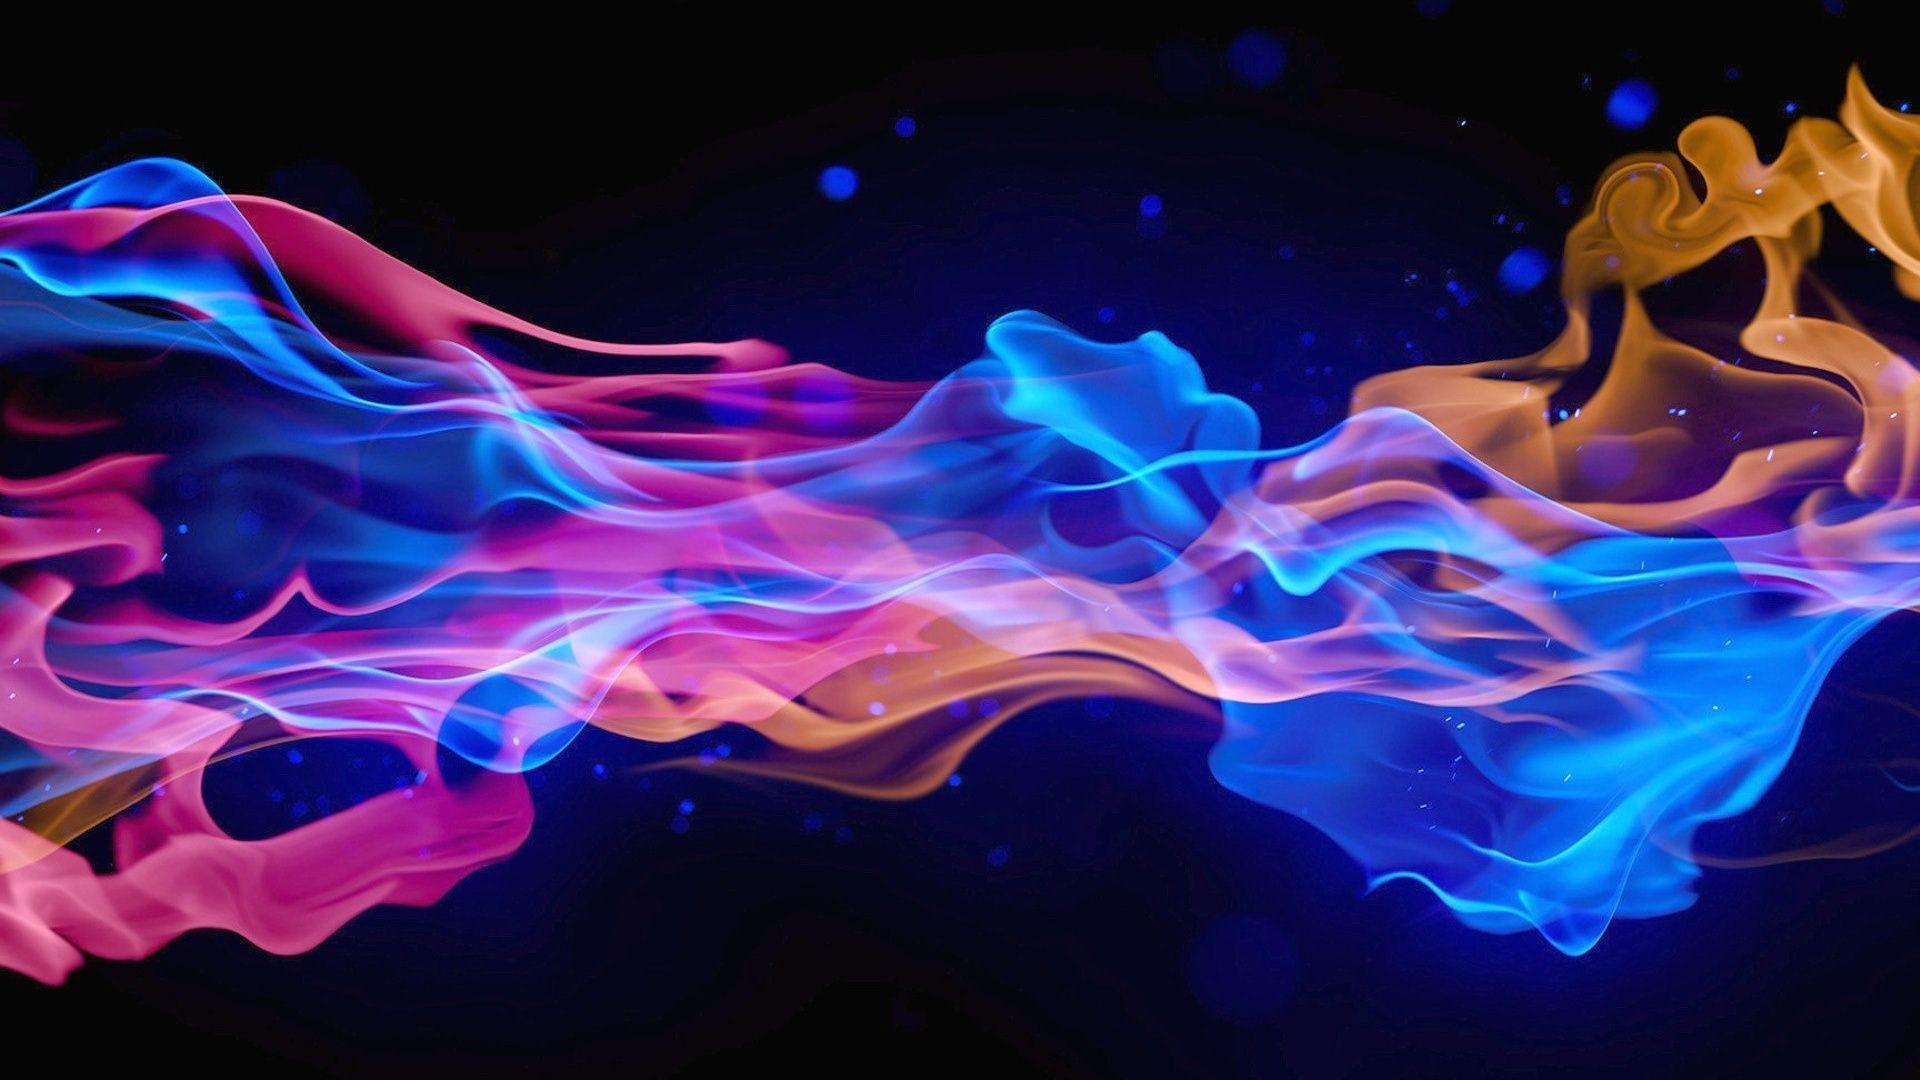 Blue And Red Fire Wallpaper High Definition weq1 1920x1080 px